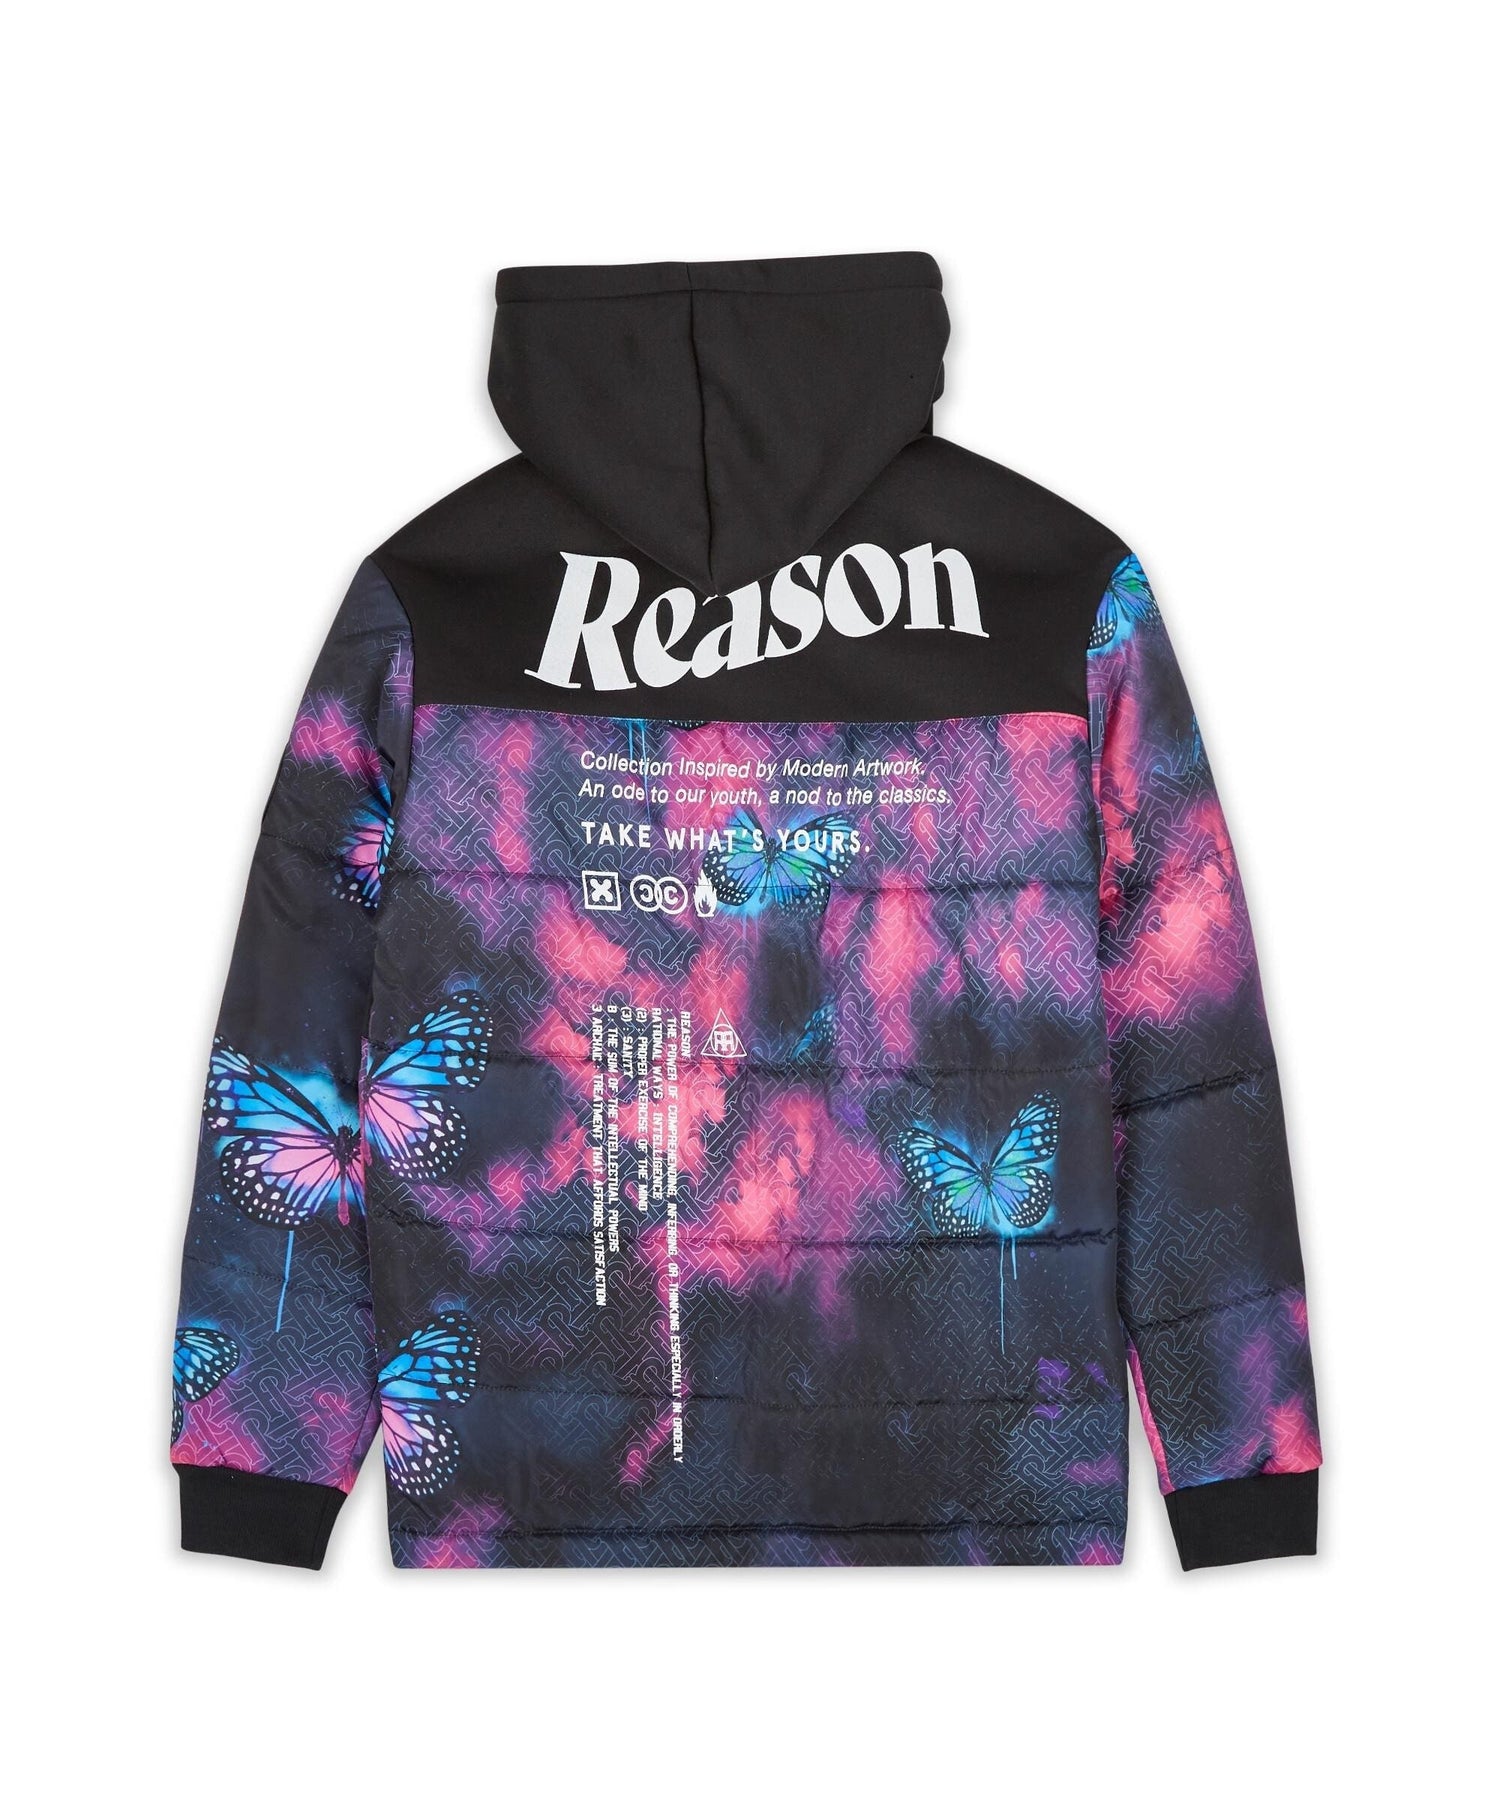 Reason Clothing | Shop Our Latest Outerwear